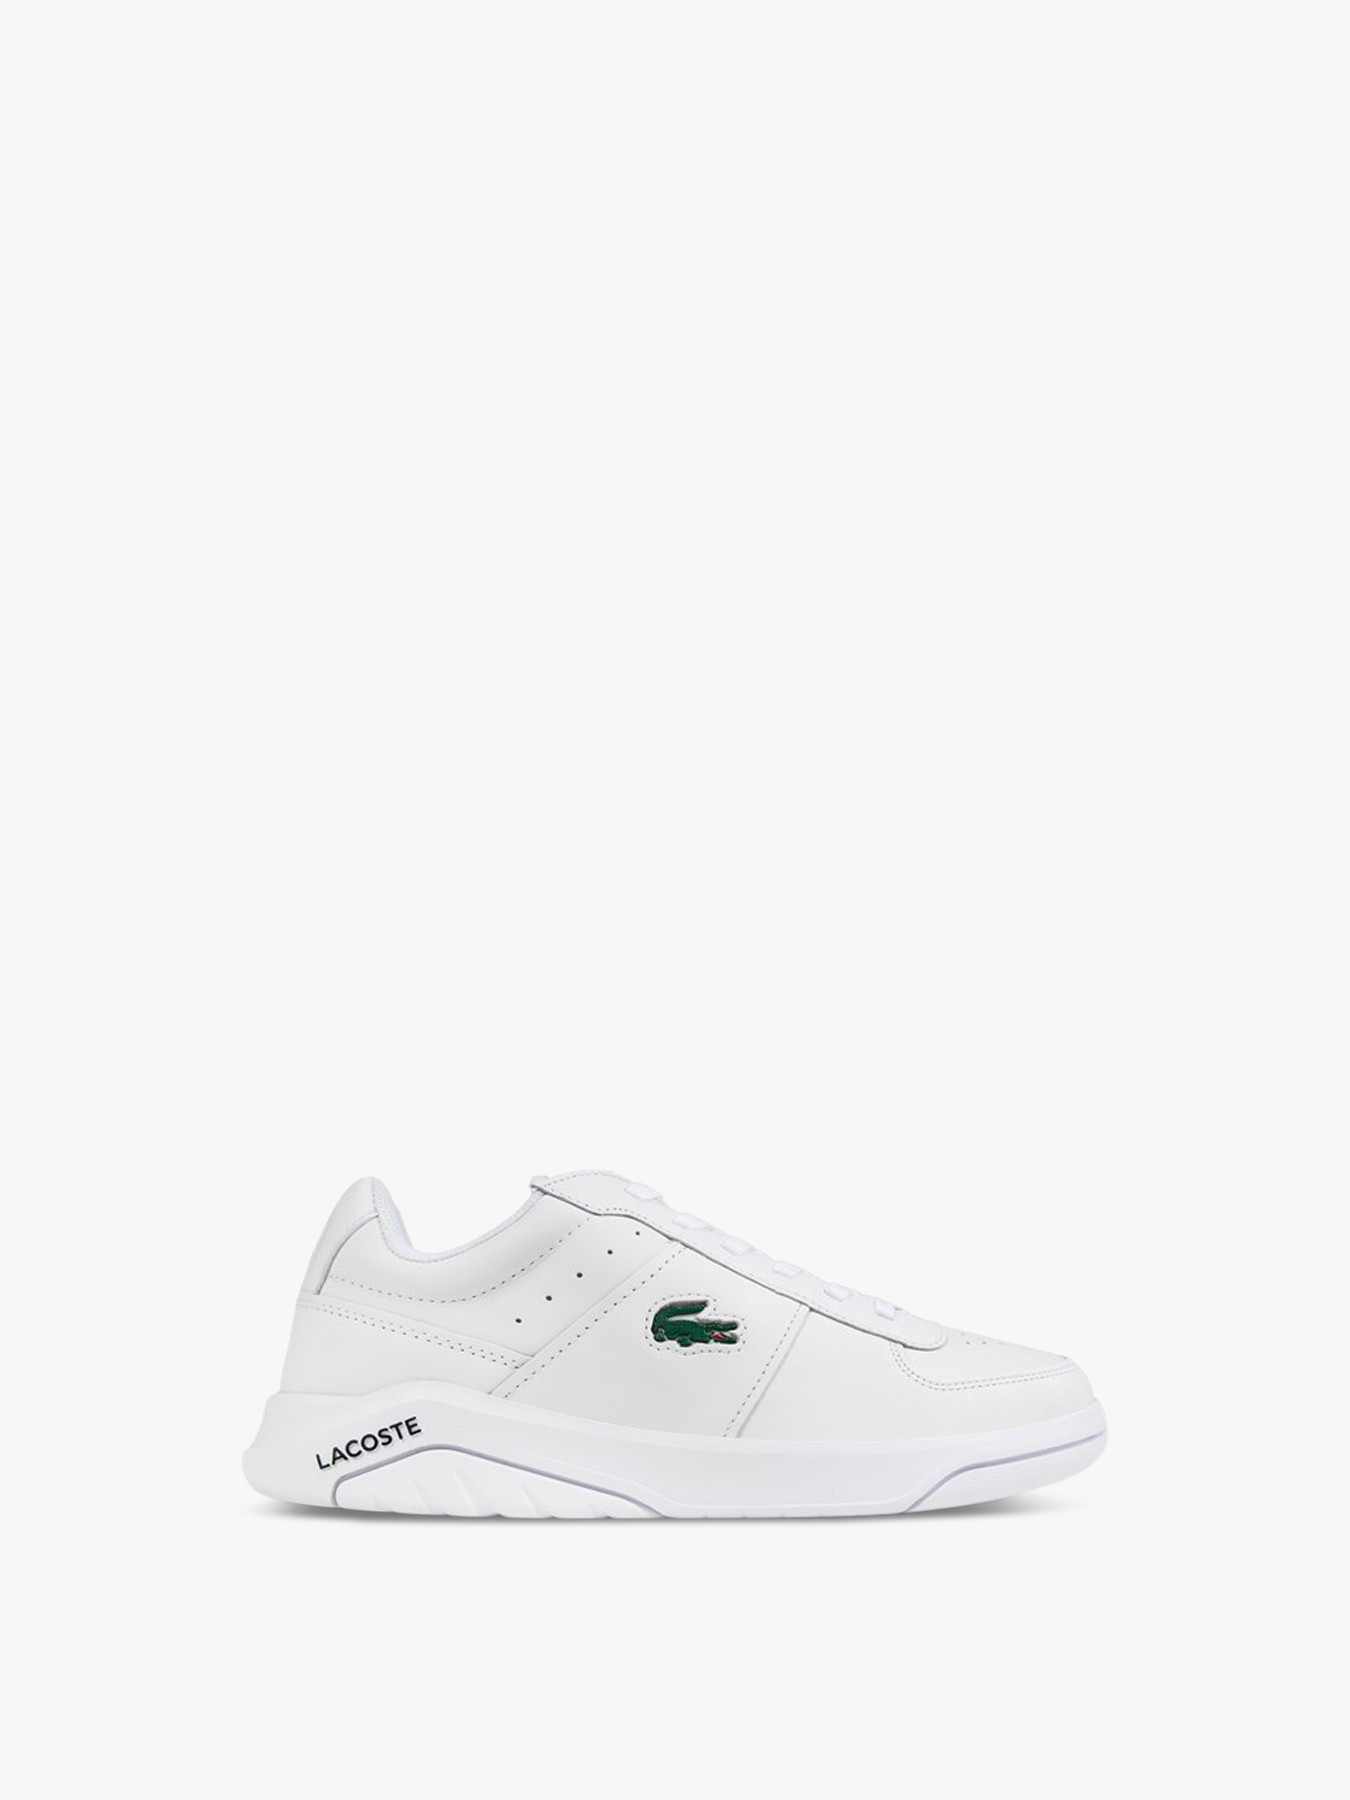 Lacoste Game Advance Trainers